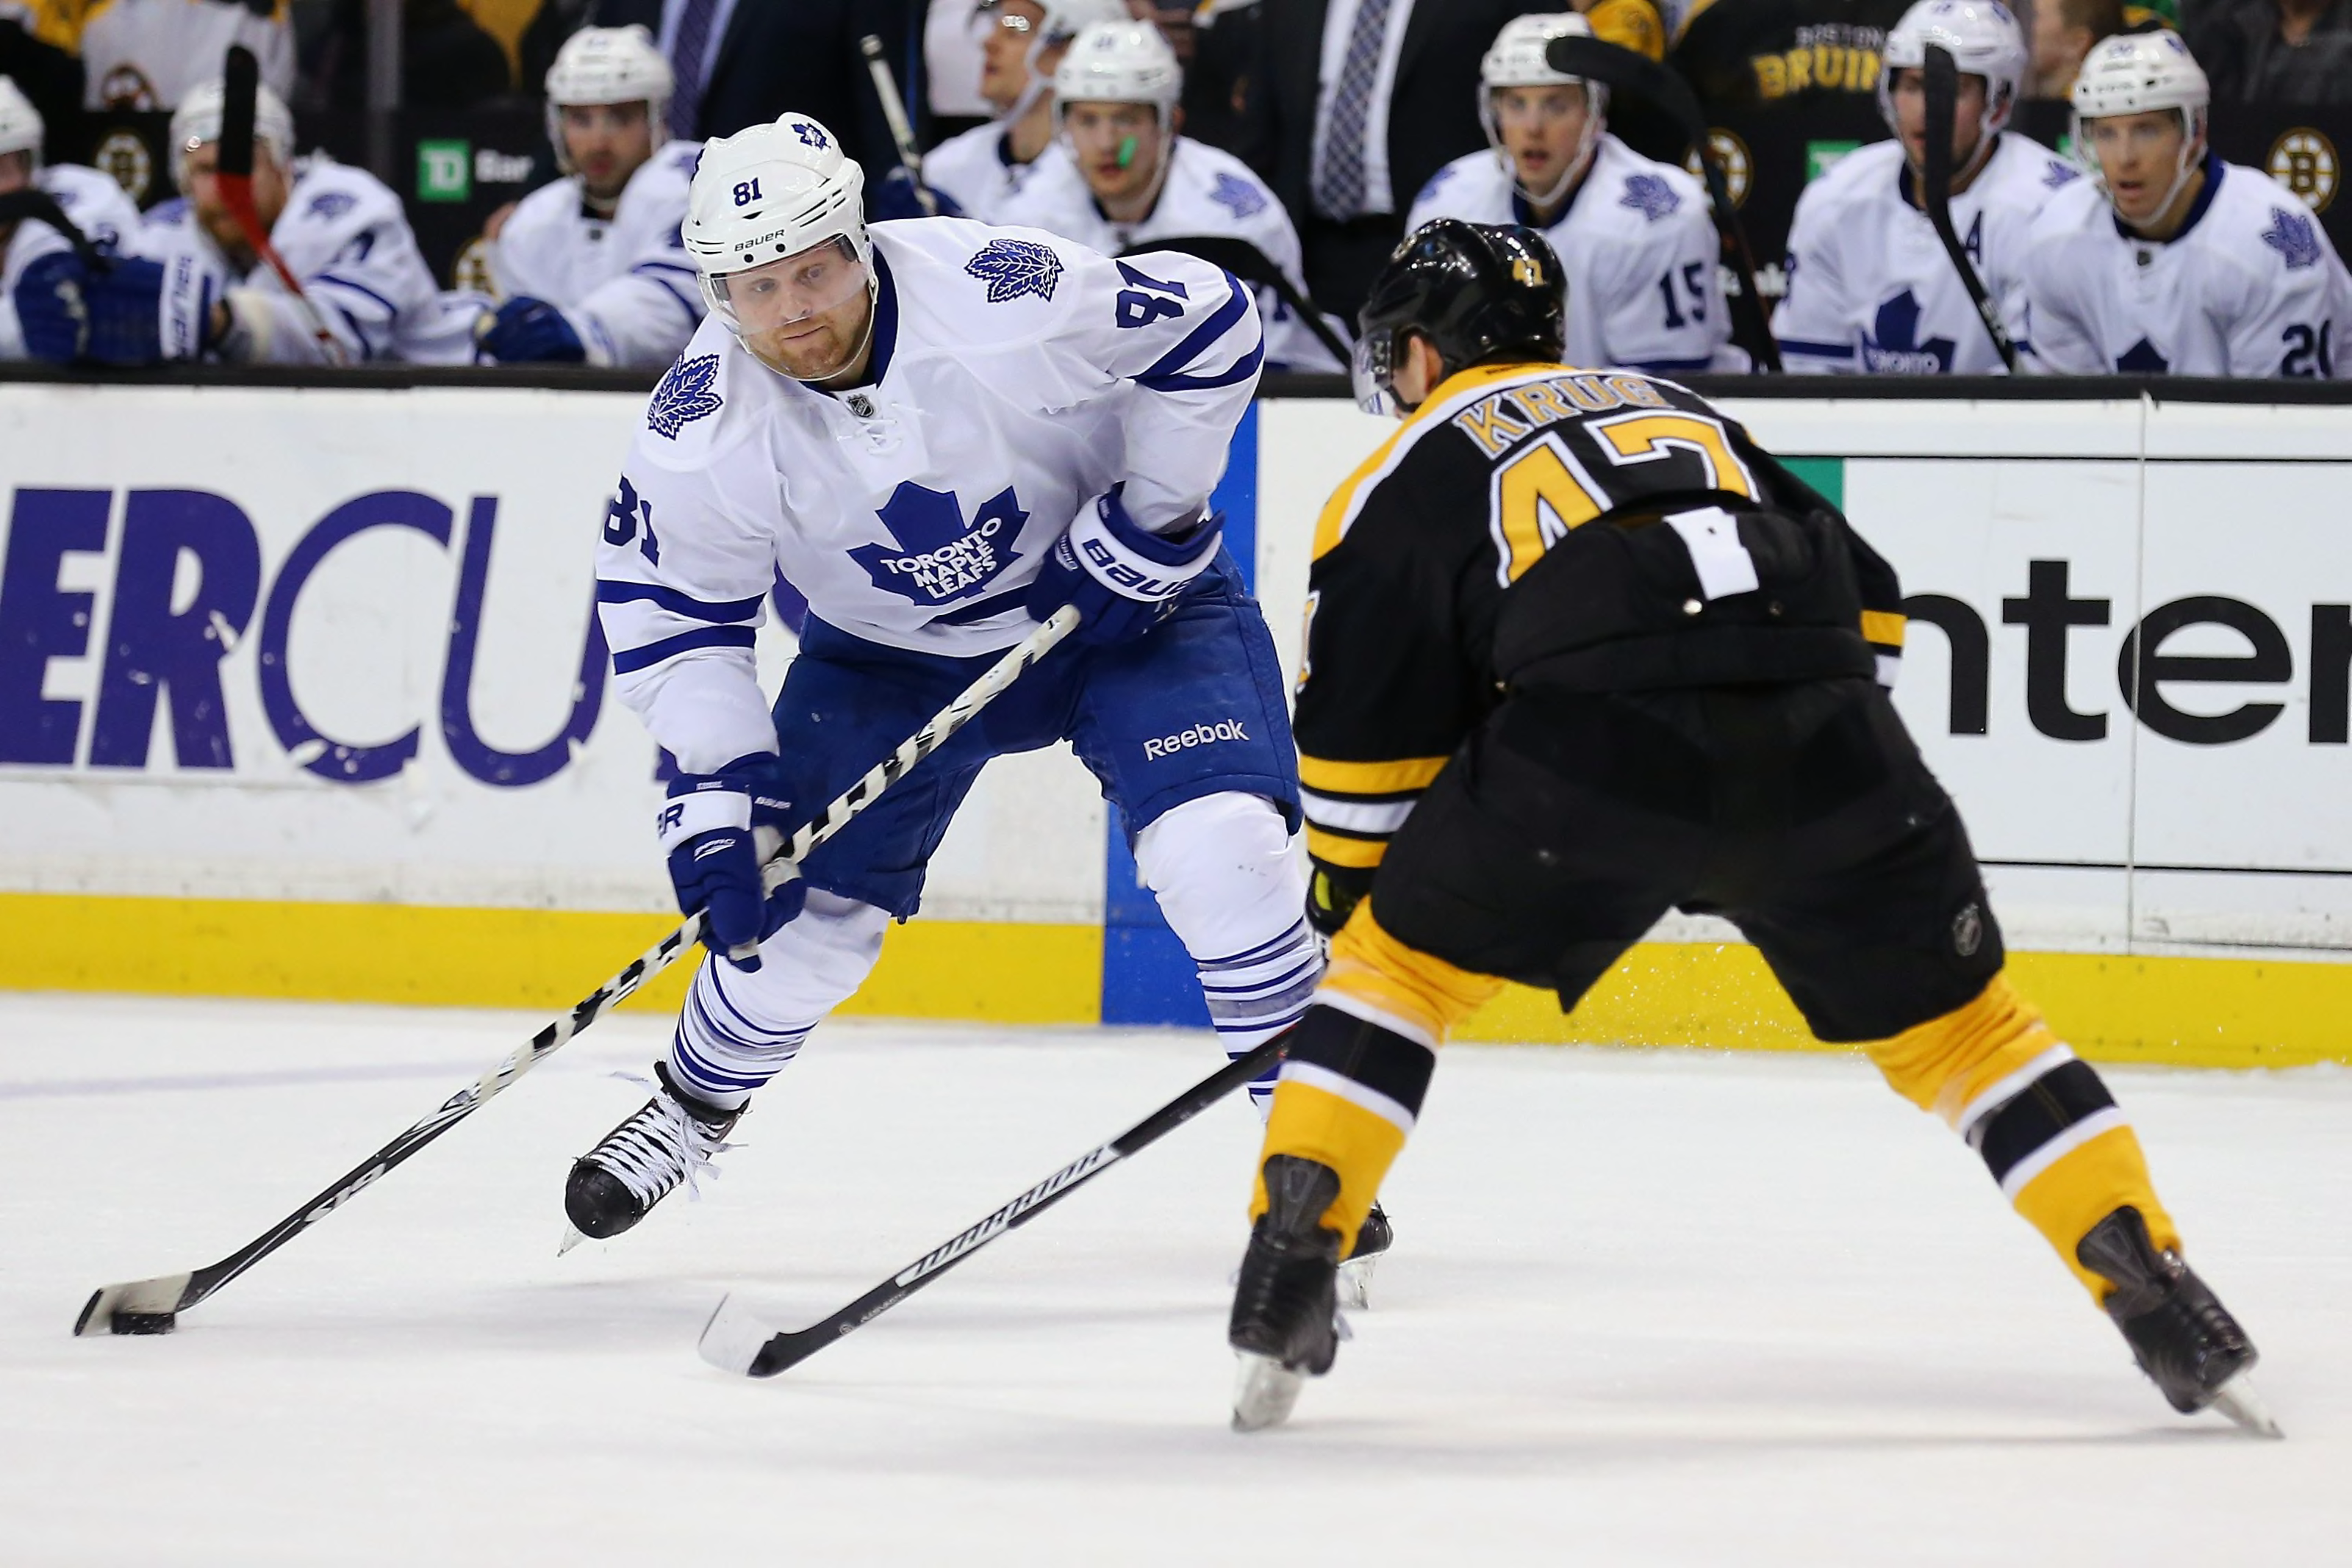 The History of Trades Between the Toronto Maple Leafs and Boston Bruins